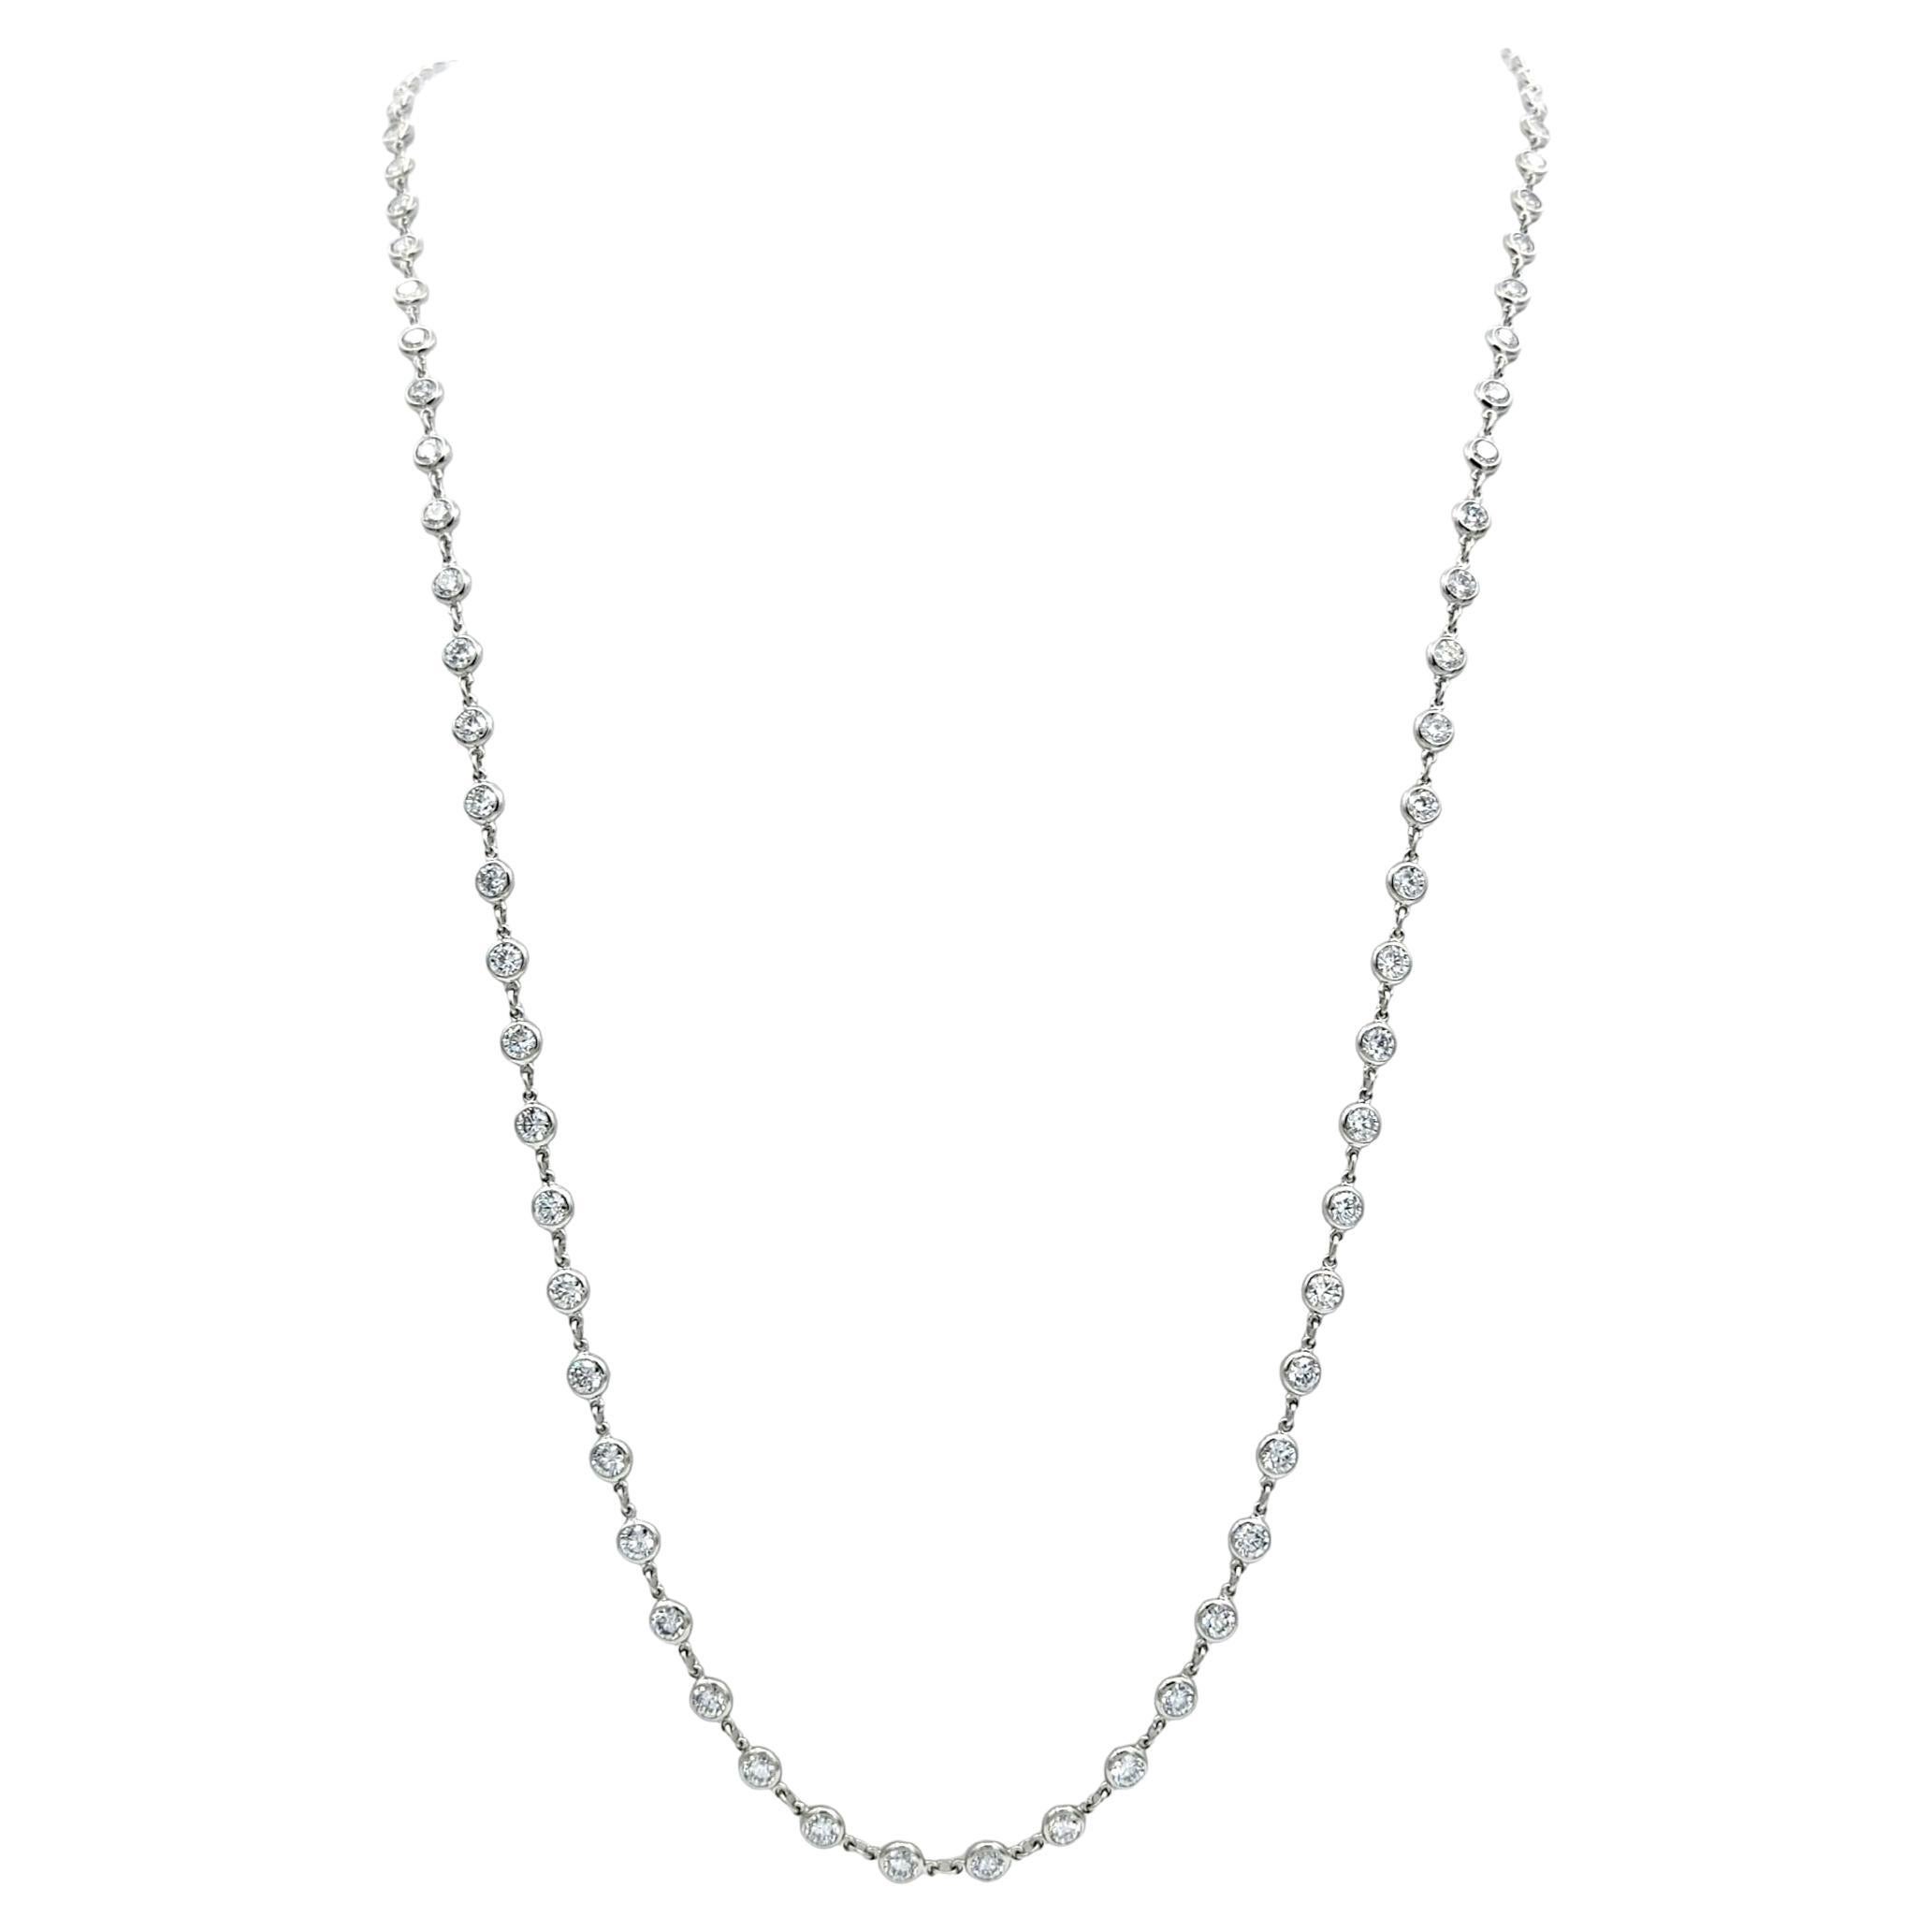 Indulge in the timeless elegance of Tiffany & Co.'s exquisite 'Diamonds by the Yard' necklace, a masterpiece crafted by the renowned designer Elsa Peretti. Set in lustrous platinum, this opulent chain is adorned with 121 round brilliant diamonds,